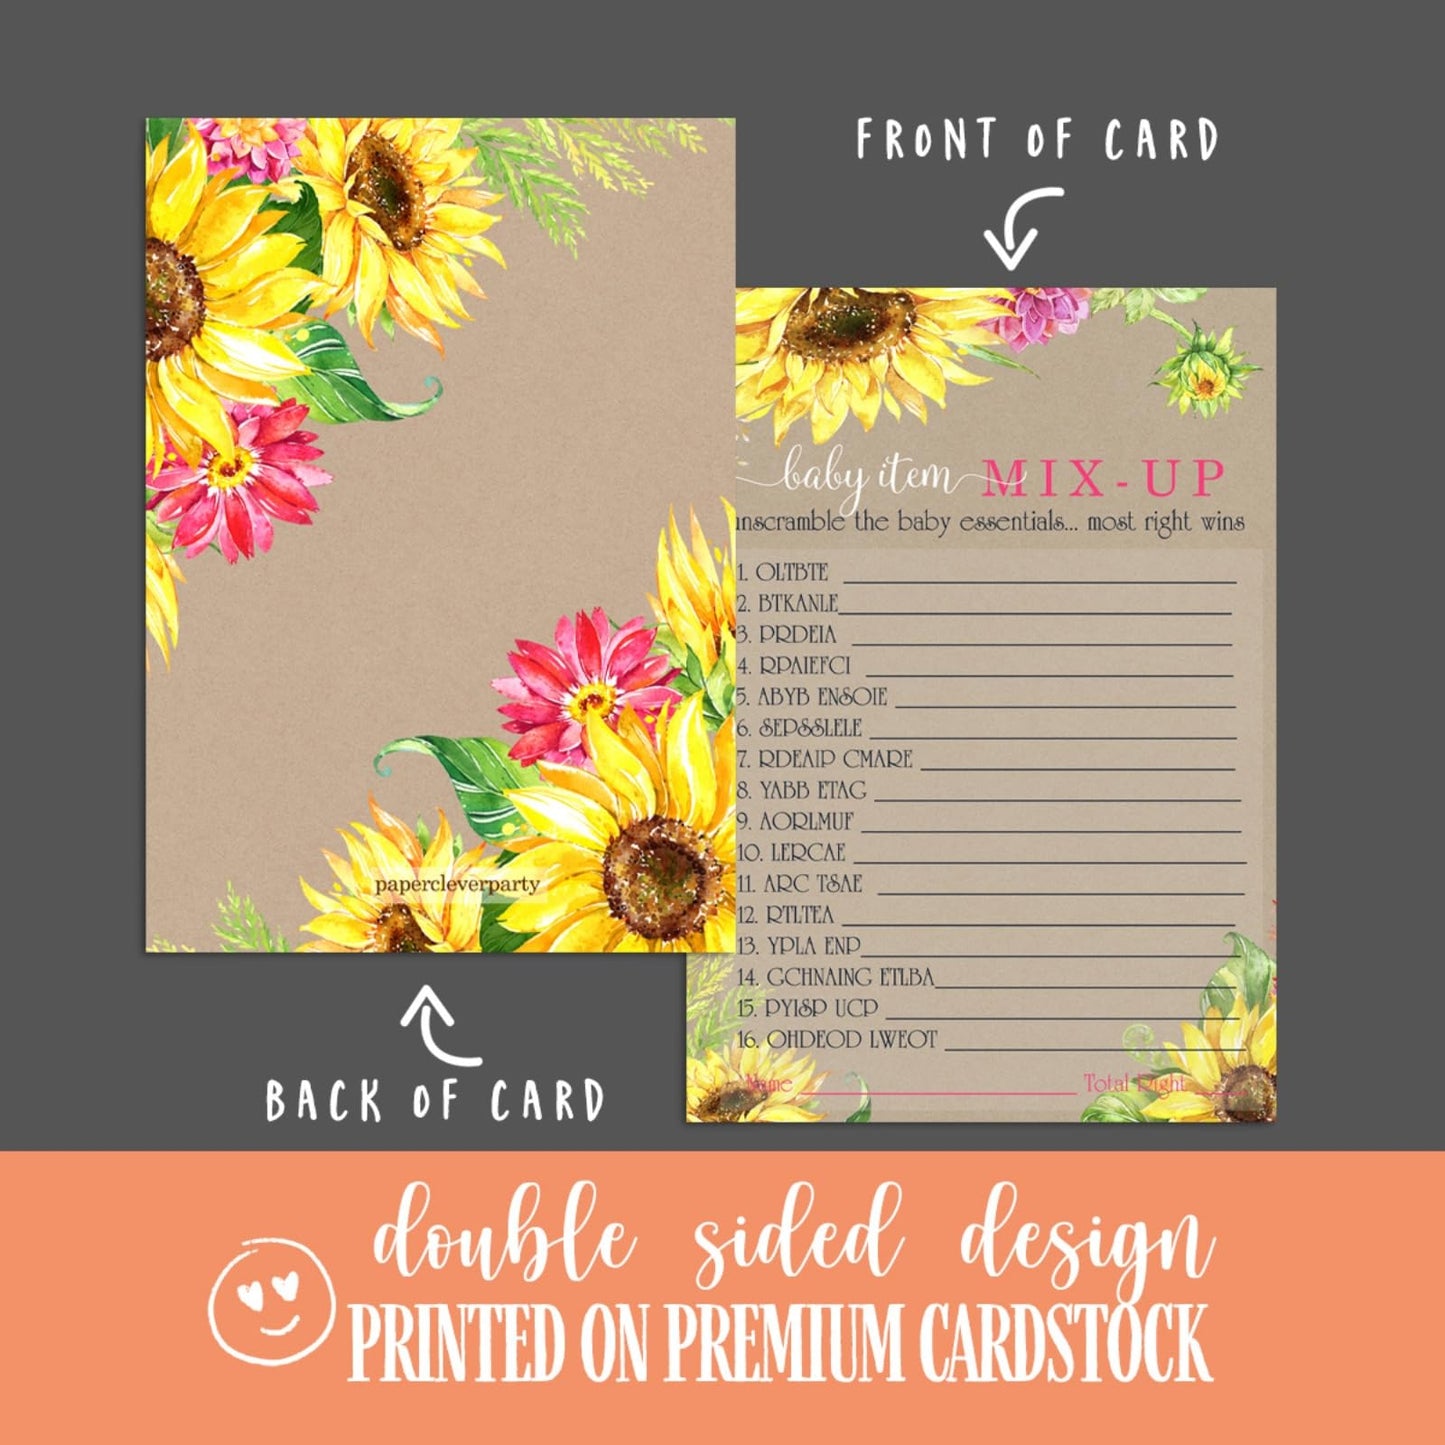 Sunflower Baby Shower Word Scramble Game Cards (25 Pack) Unscramble Activity Gender Reveal - Girls Baby Shower Games - Fall Rustic Floral Yellow Pink - Printed 5x7 Size SetPaper Clever Party